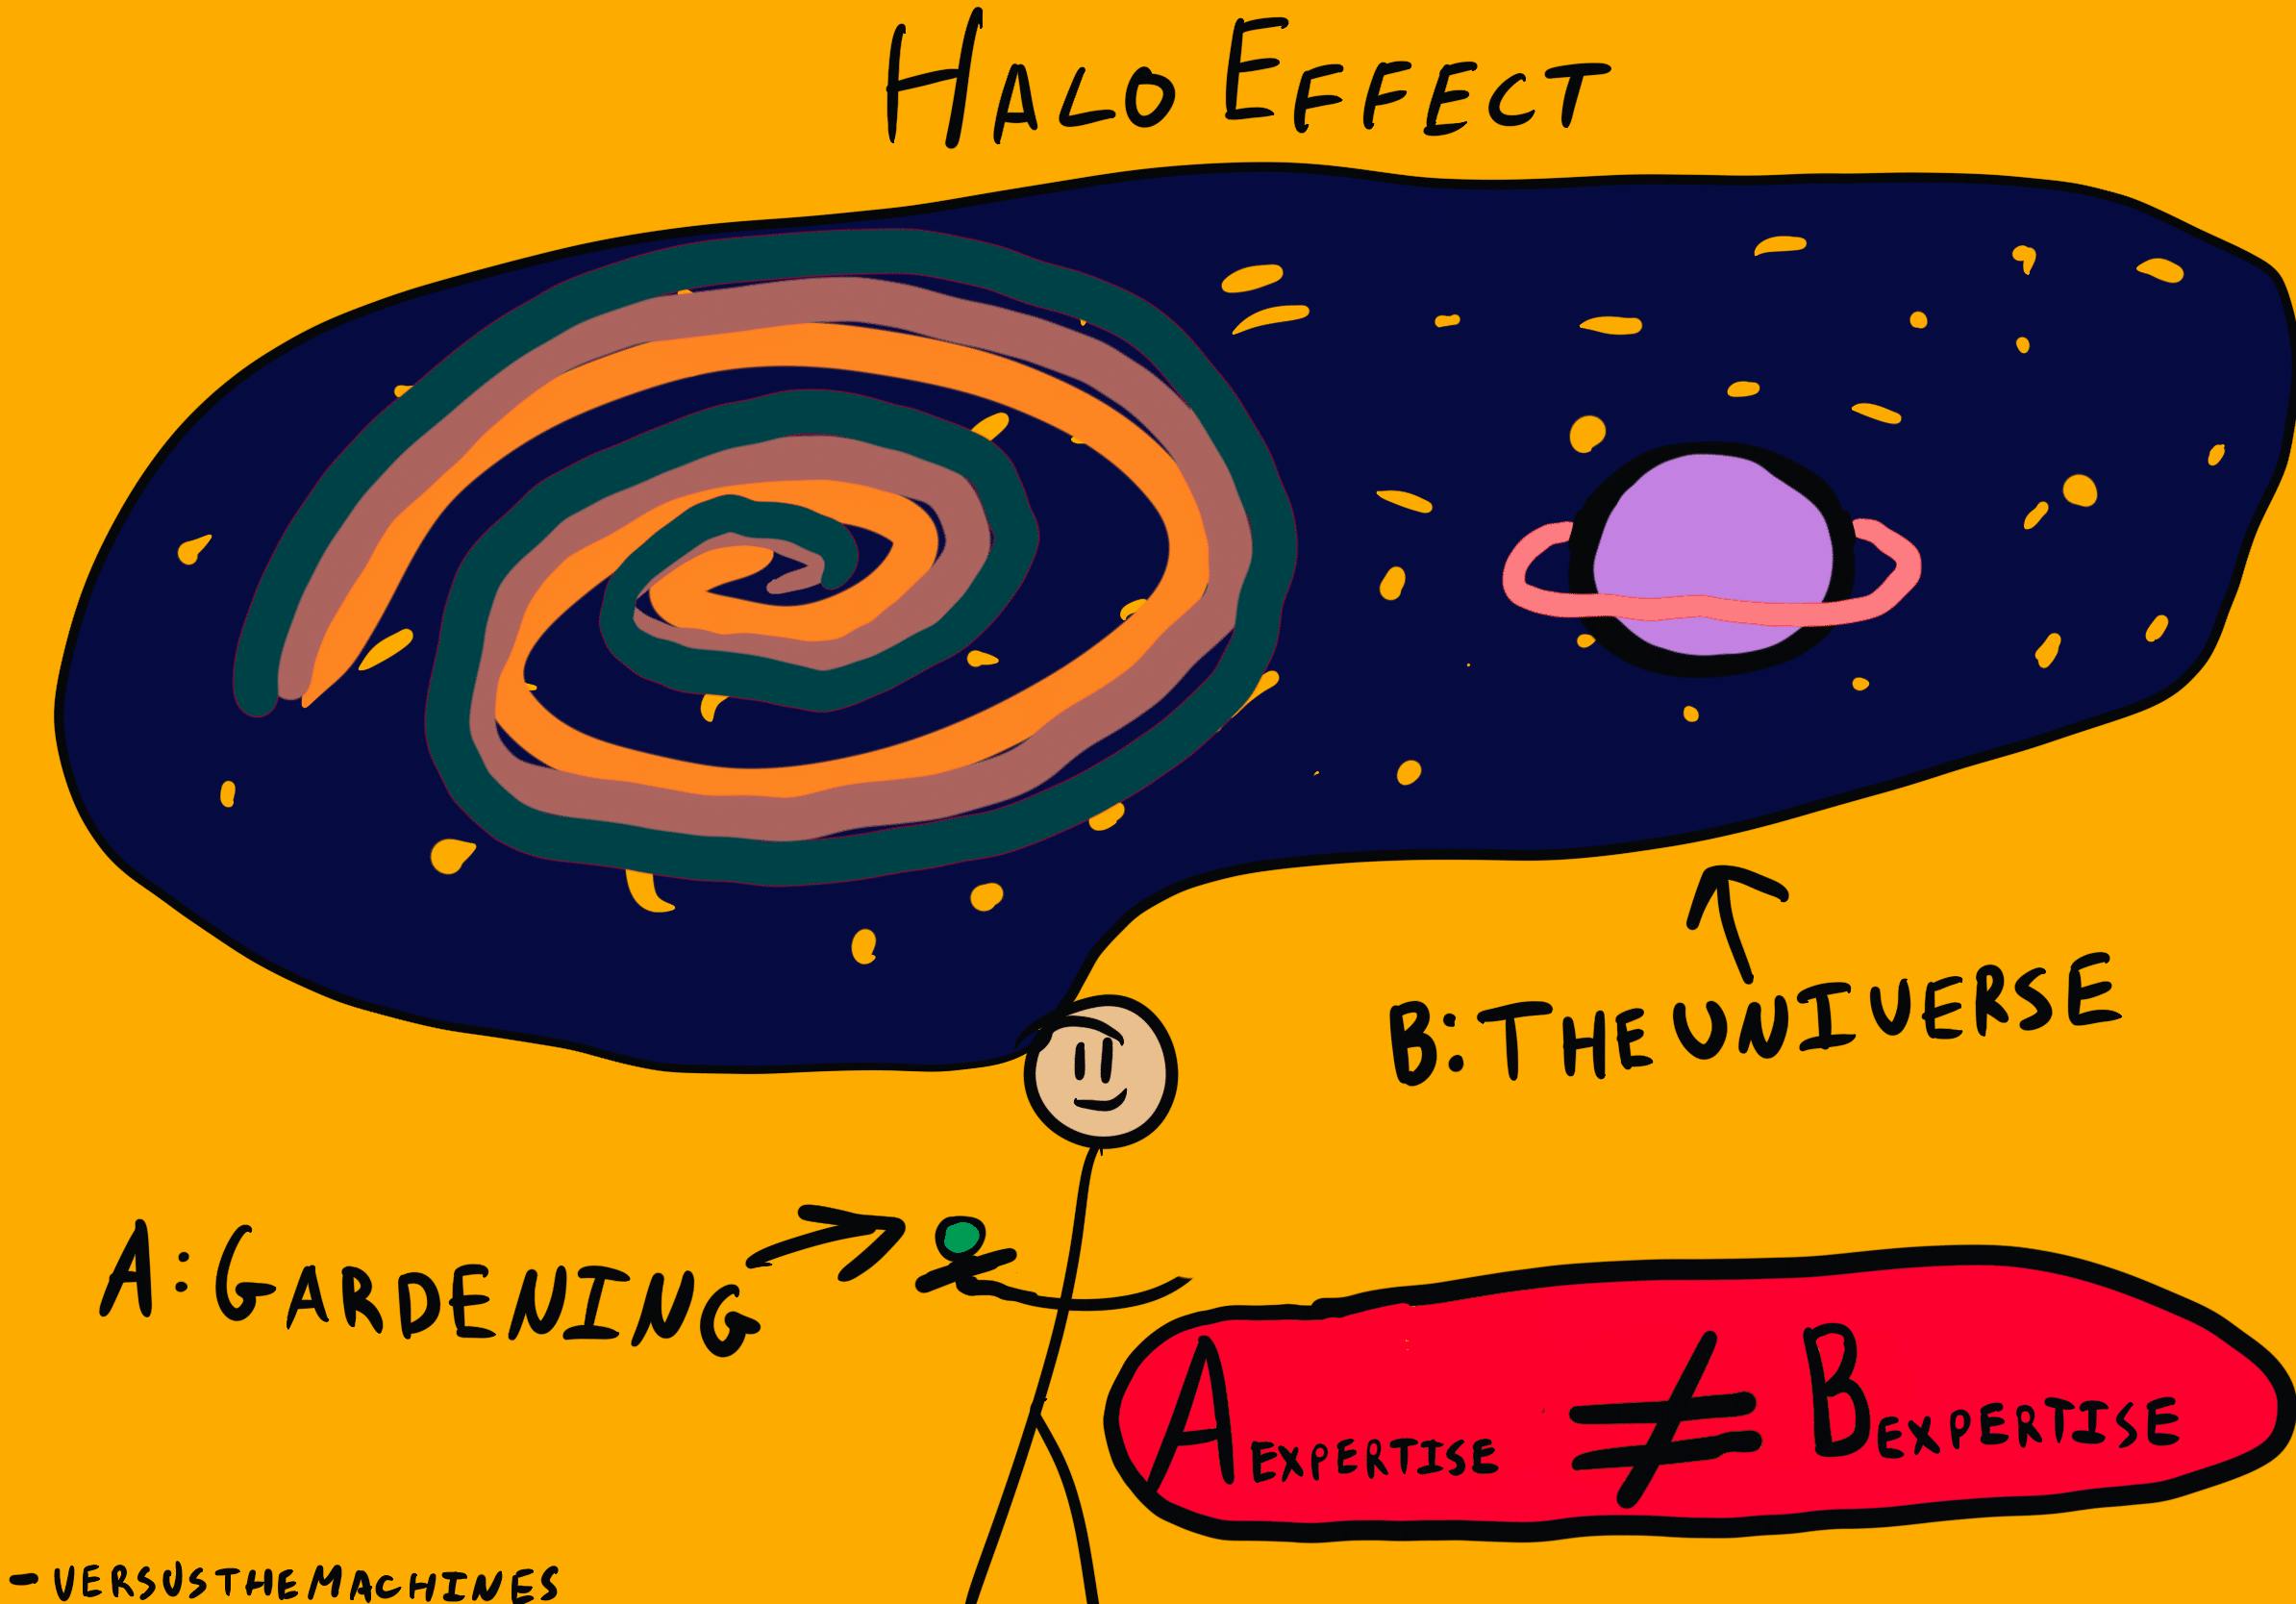 illustration of the halo effect